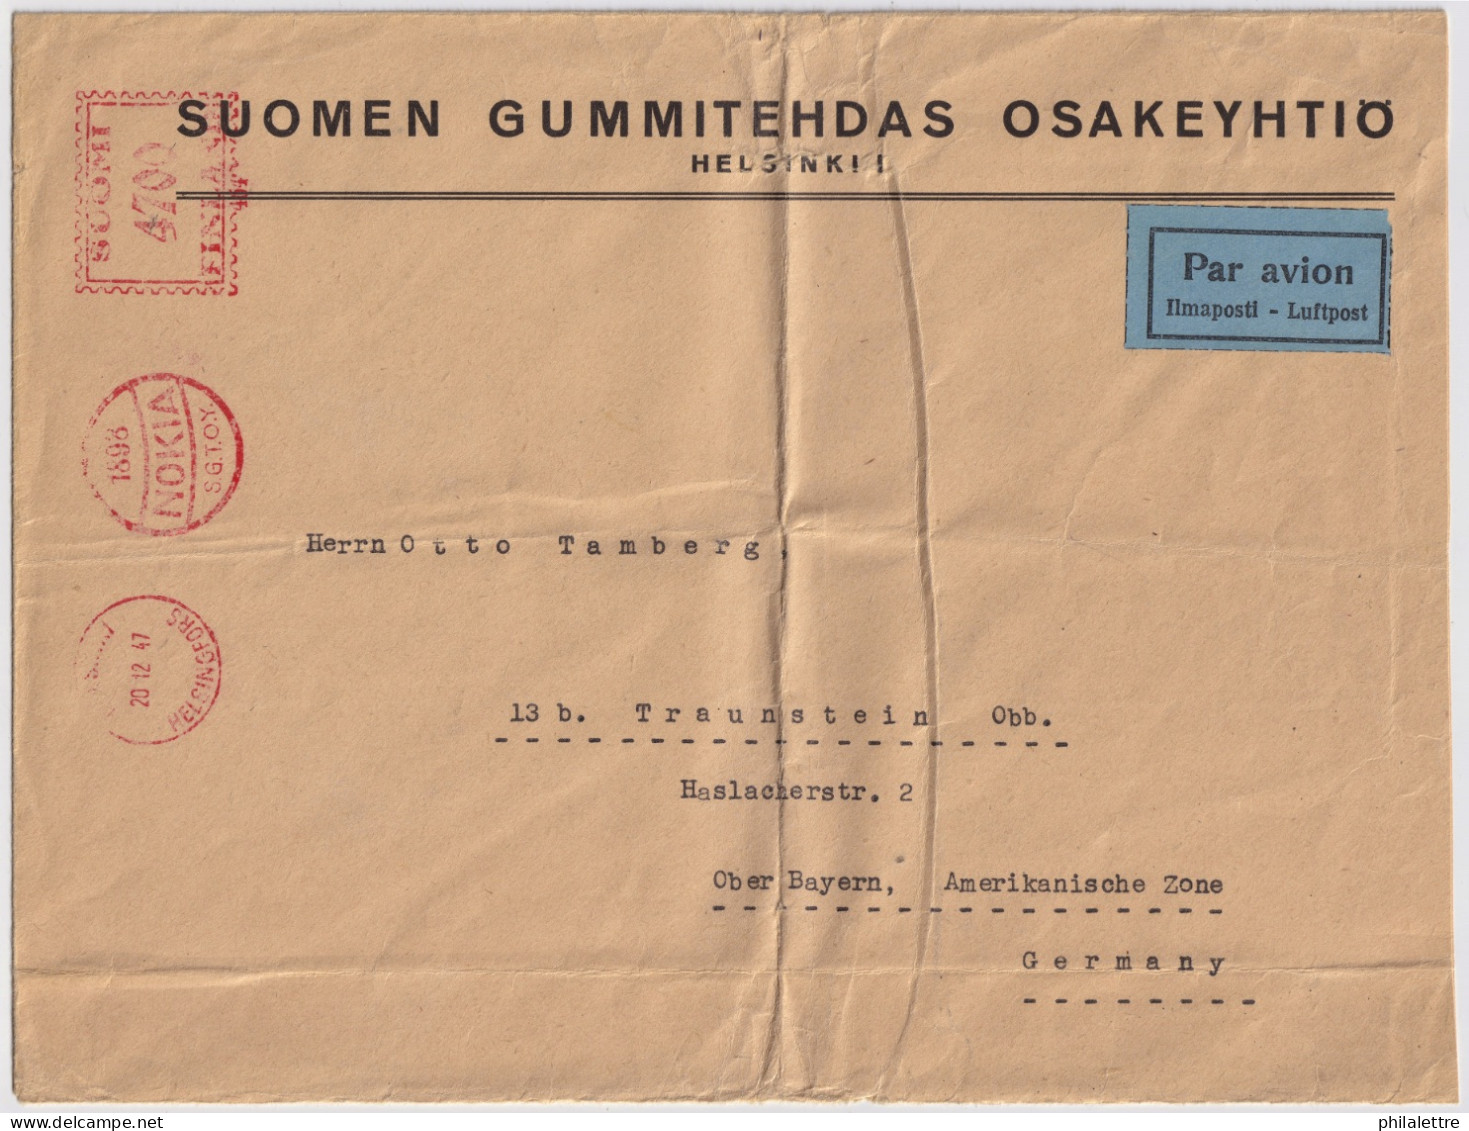 FINLAND - 1947 - "1898 / NOKIA / S.G..O.Y." Franking Mark (4700p) On Air Mail Cover To Germany - Lettres & Documents